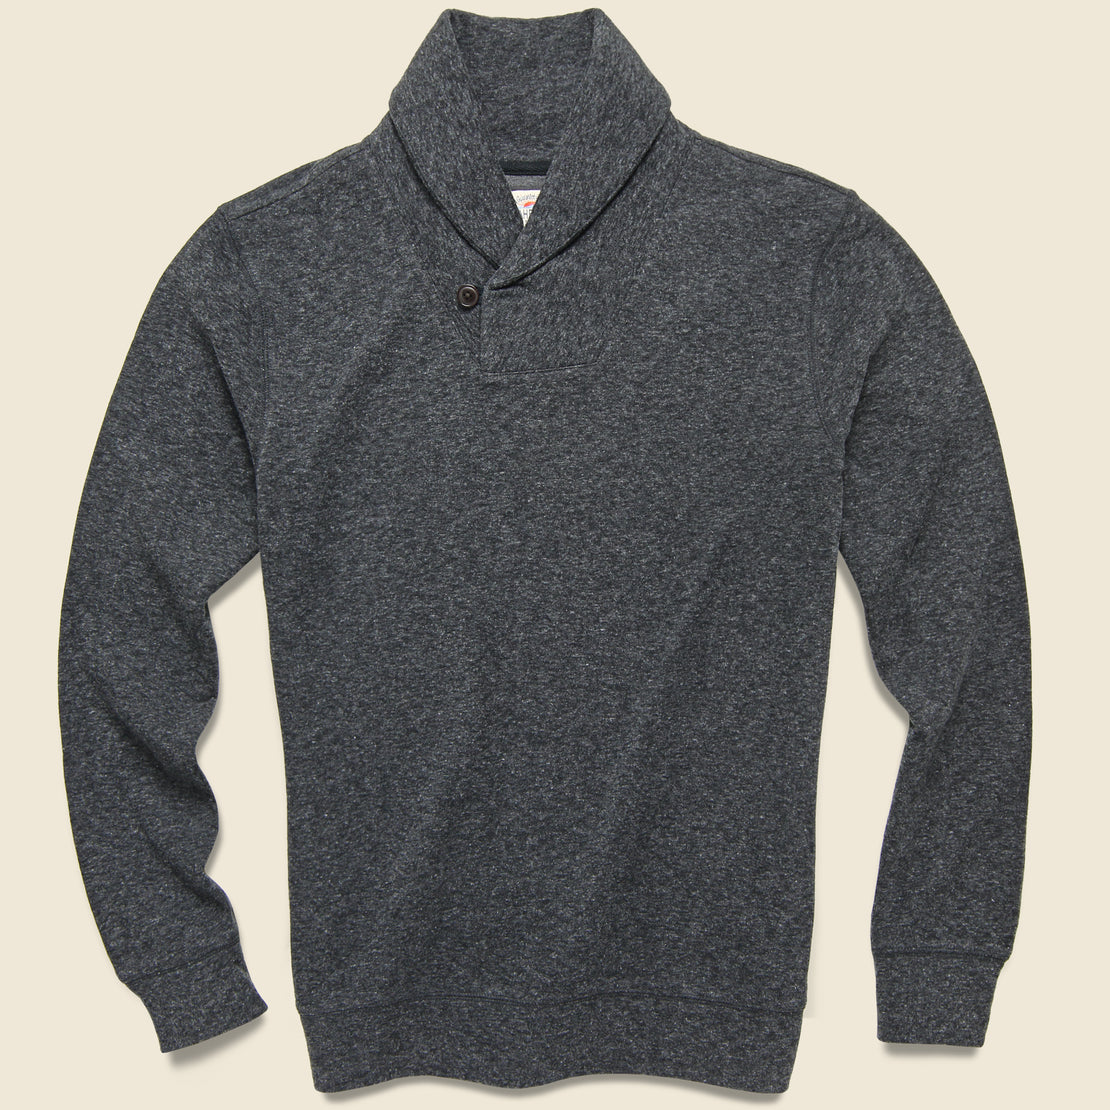 Faherty Dual Knit Shawl Collar Pullover - Washed Black